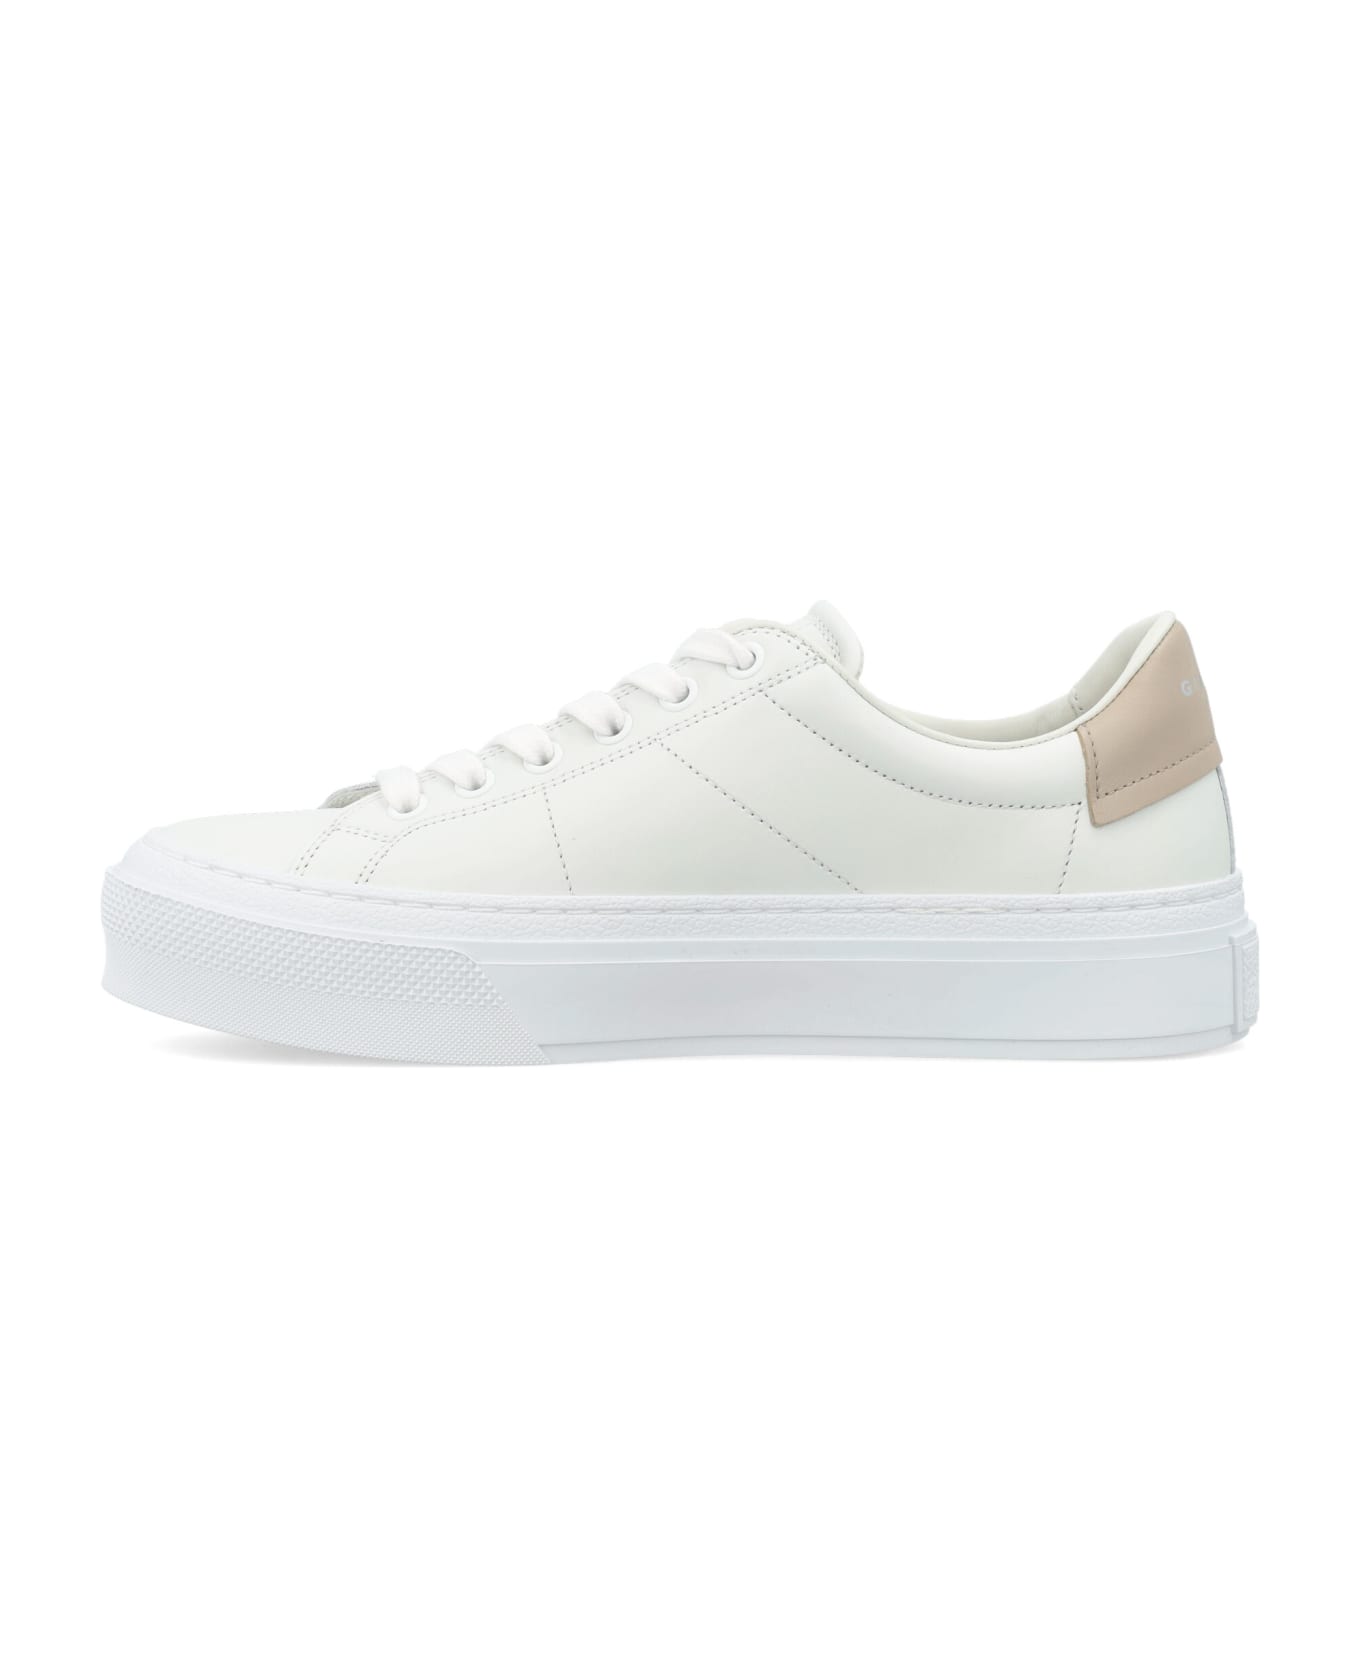 Givenchy City Sport Lace-up Sneakers - WHITE/BEIGE